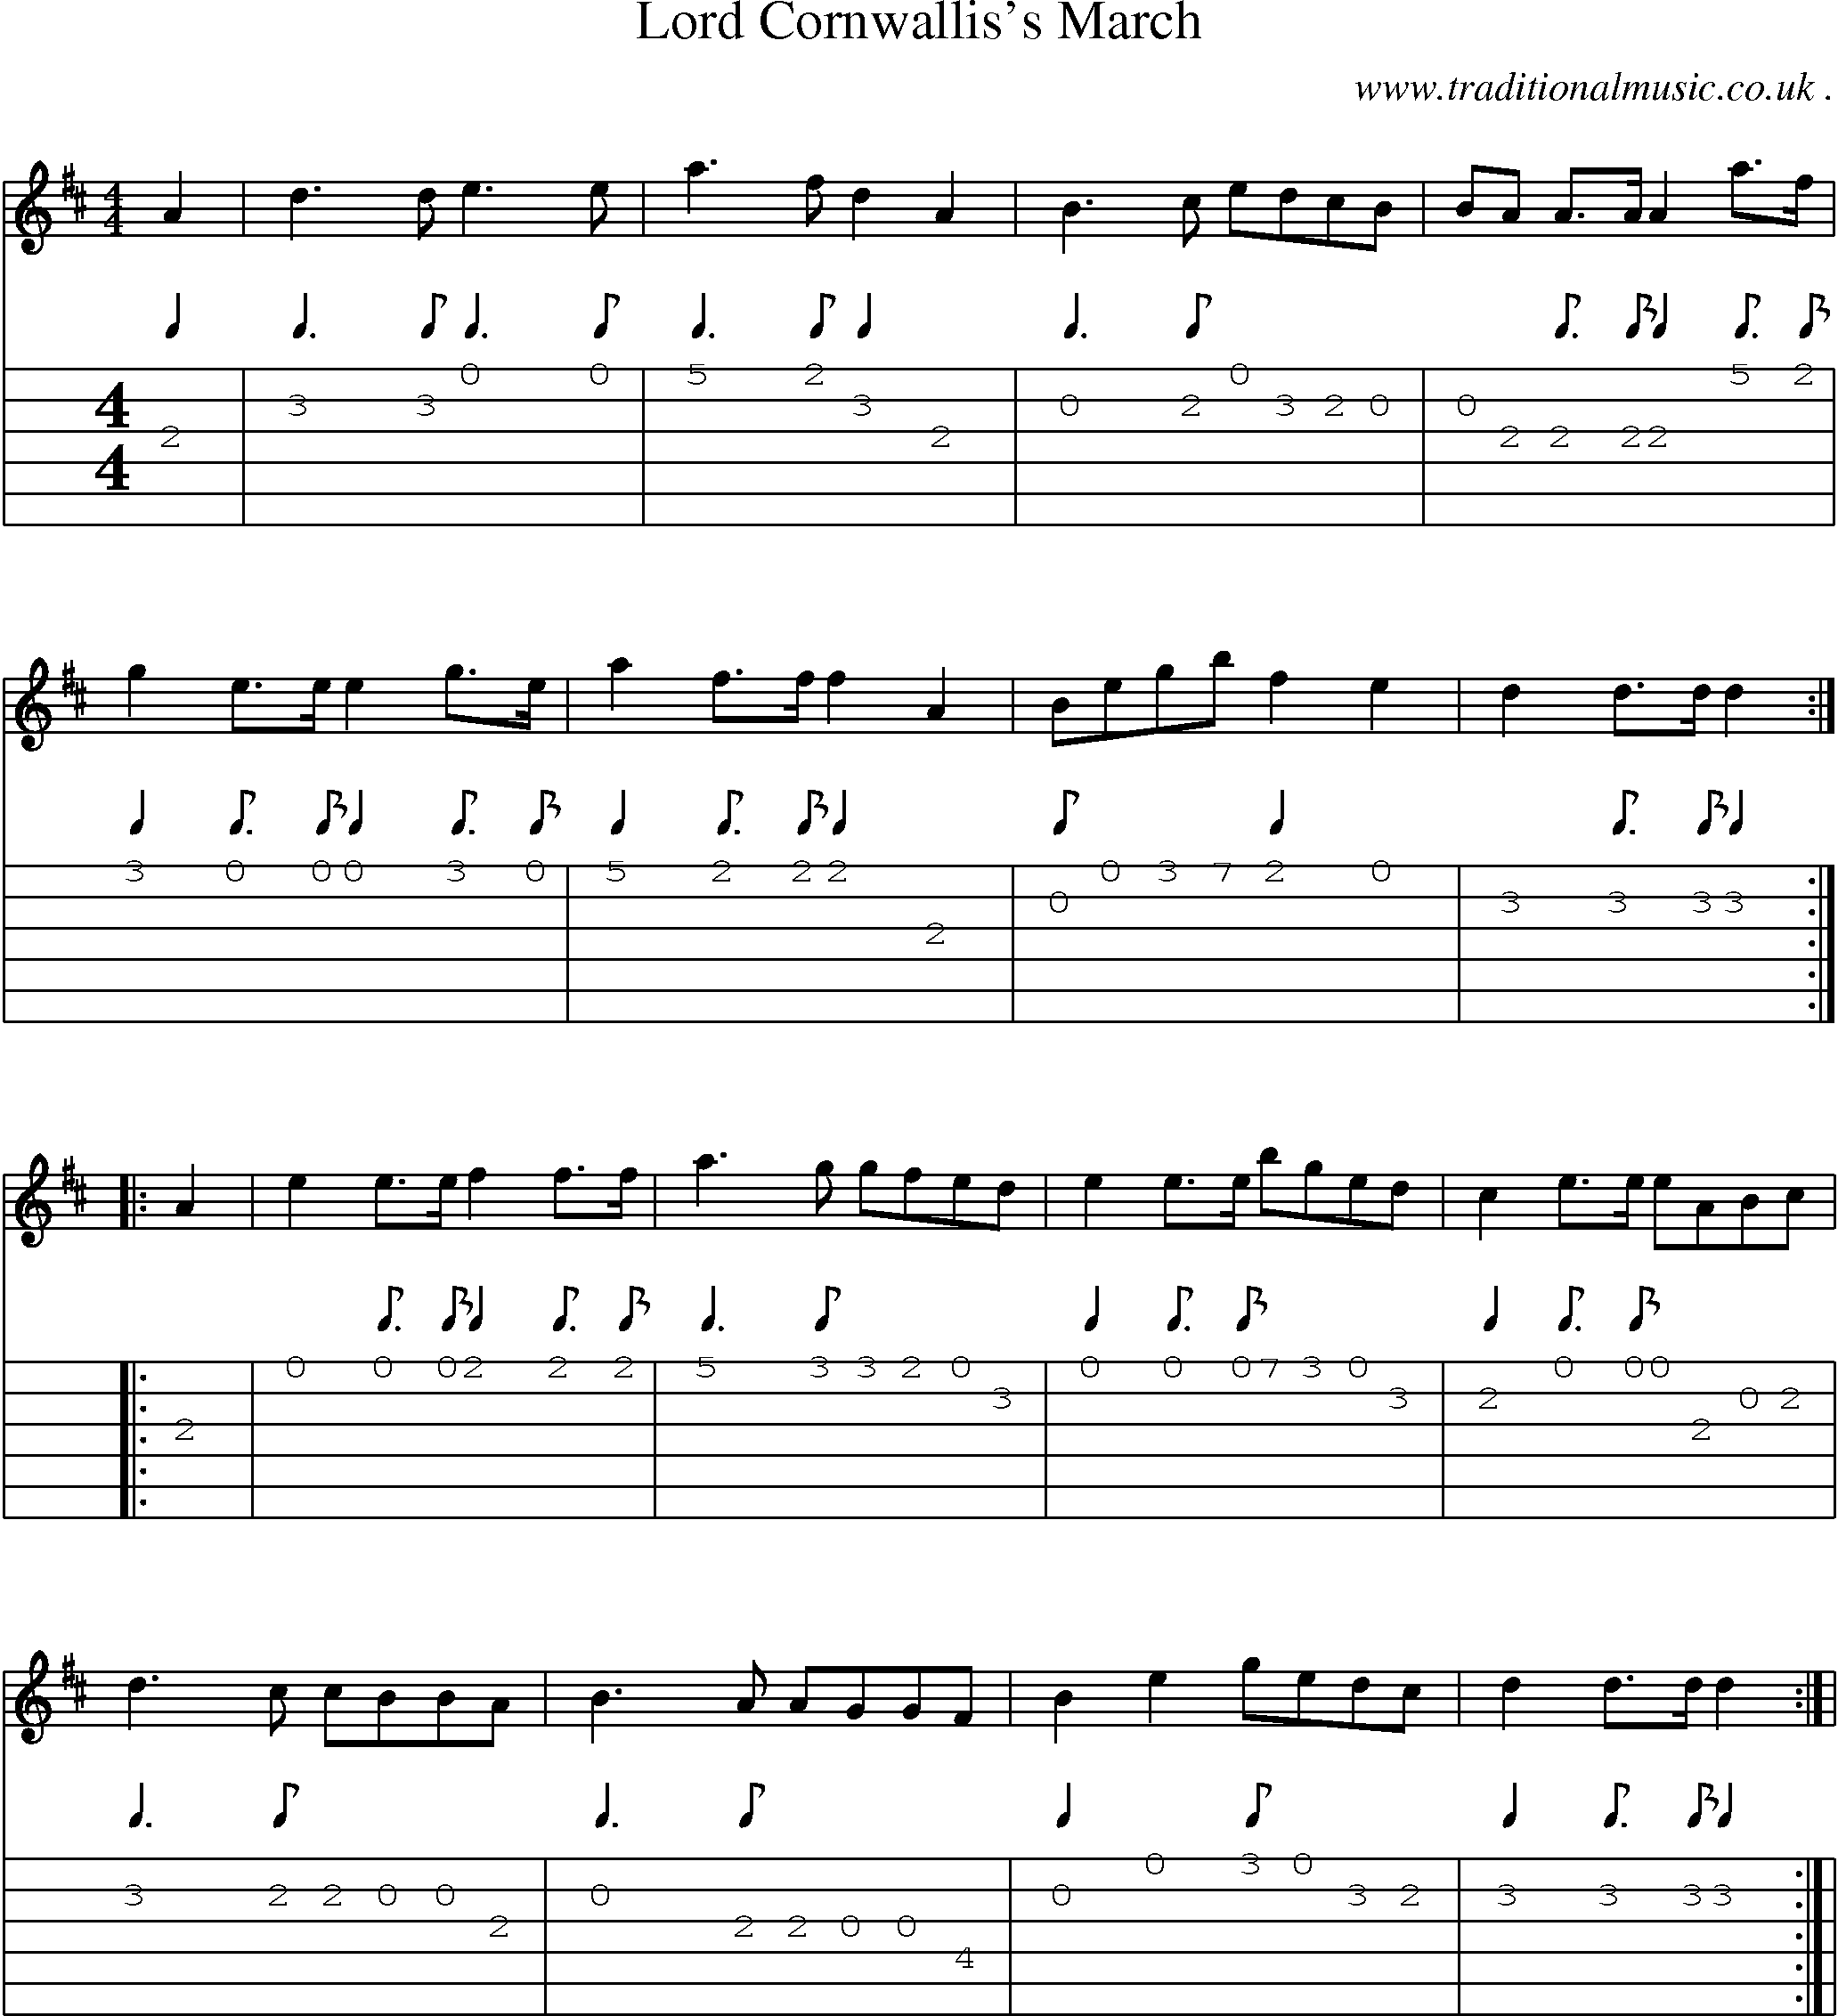 Sheet-Music and Guitar Tabs for Lord Cornwalliss March